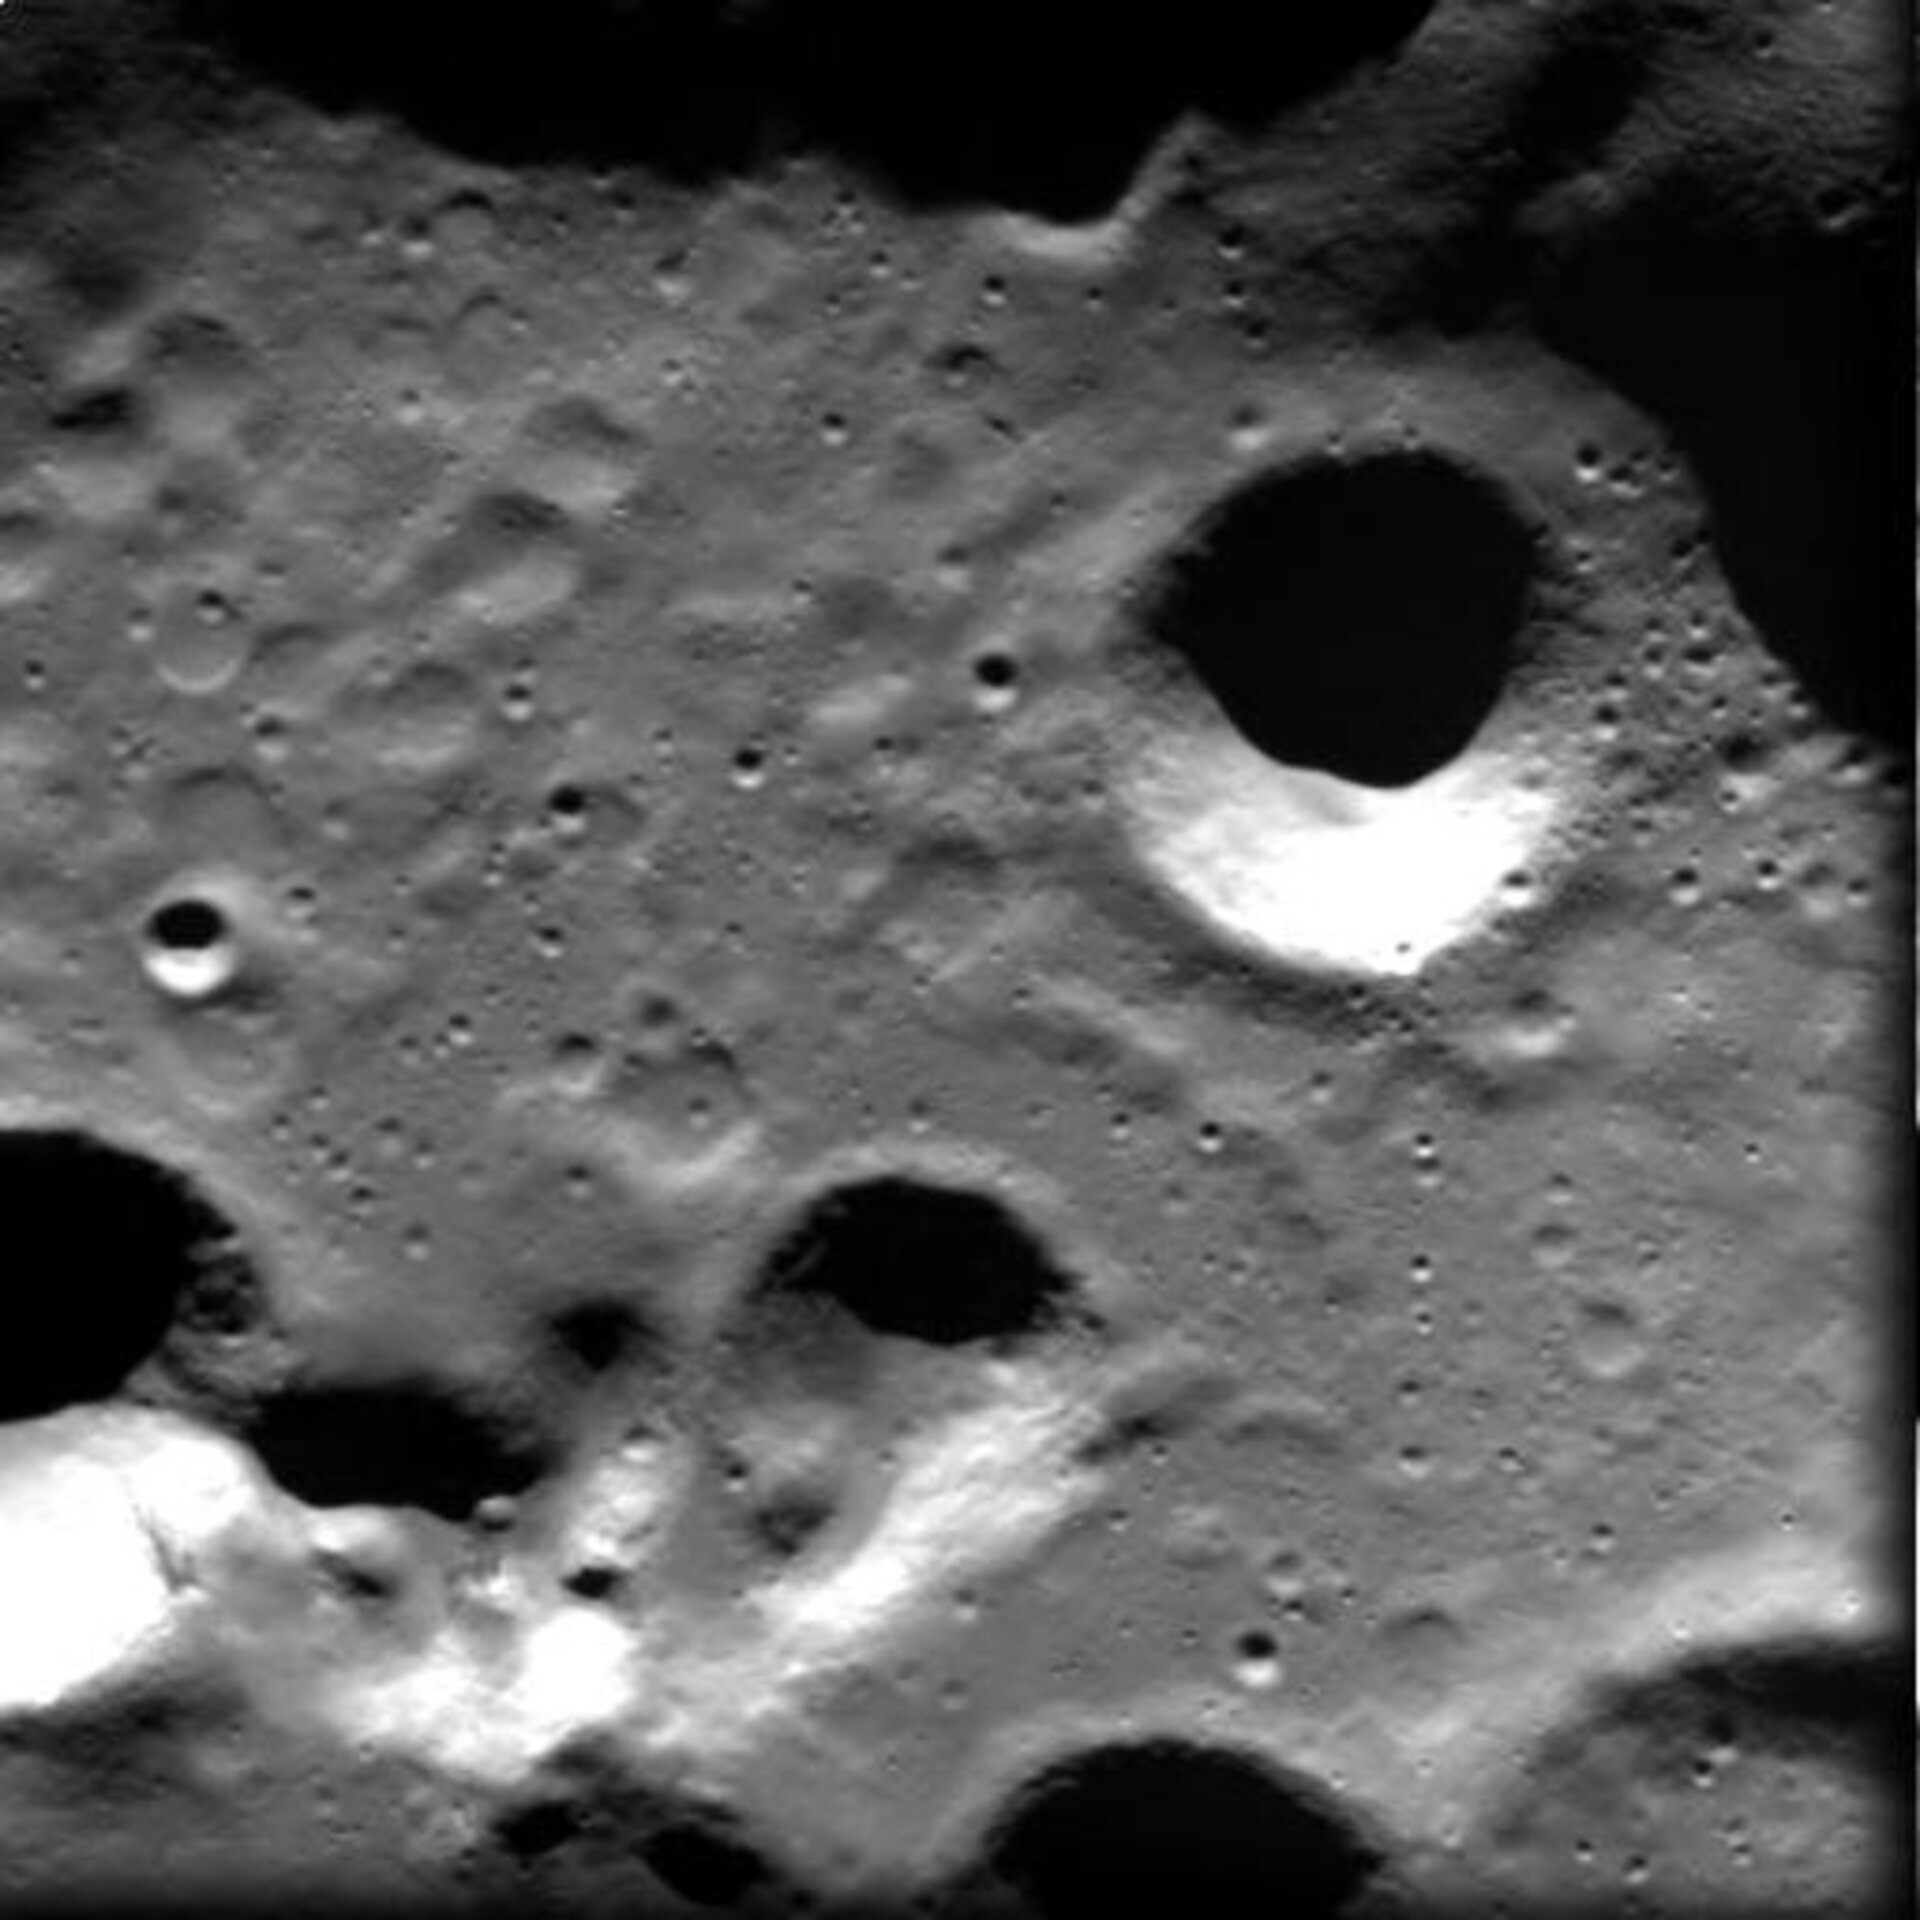 Rim of Jacobi crater as seen by SMART-1